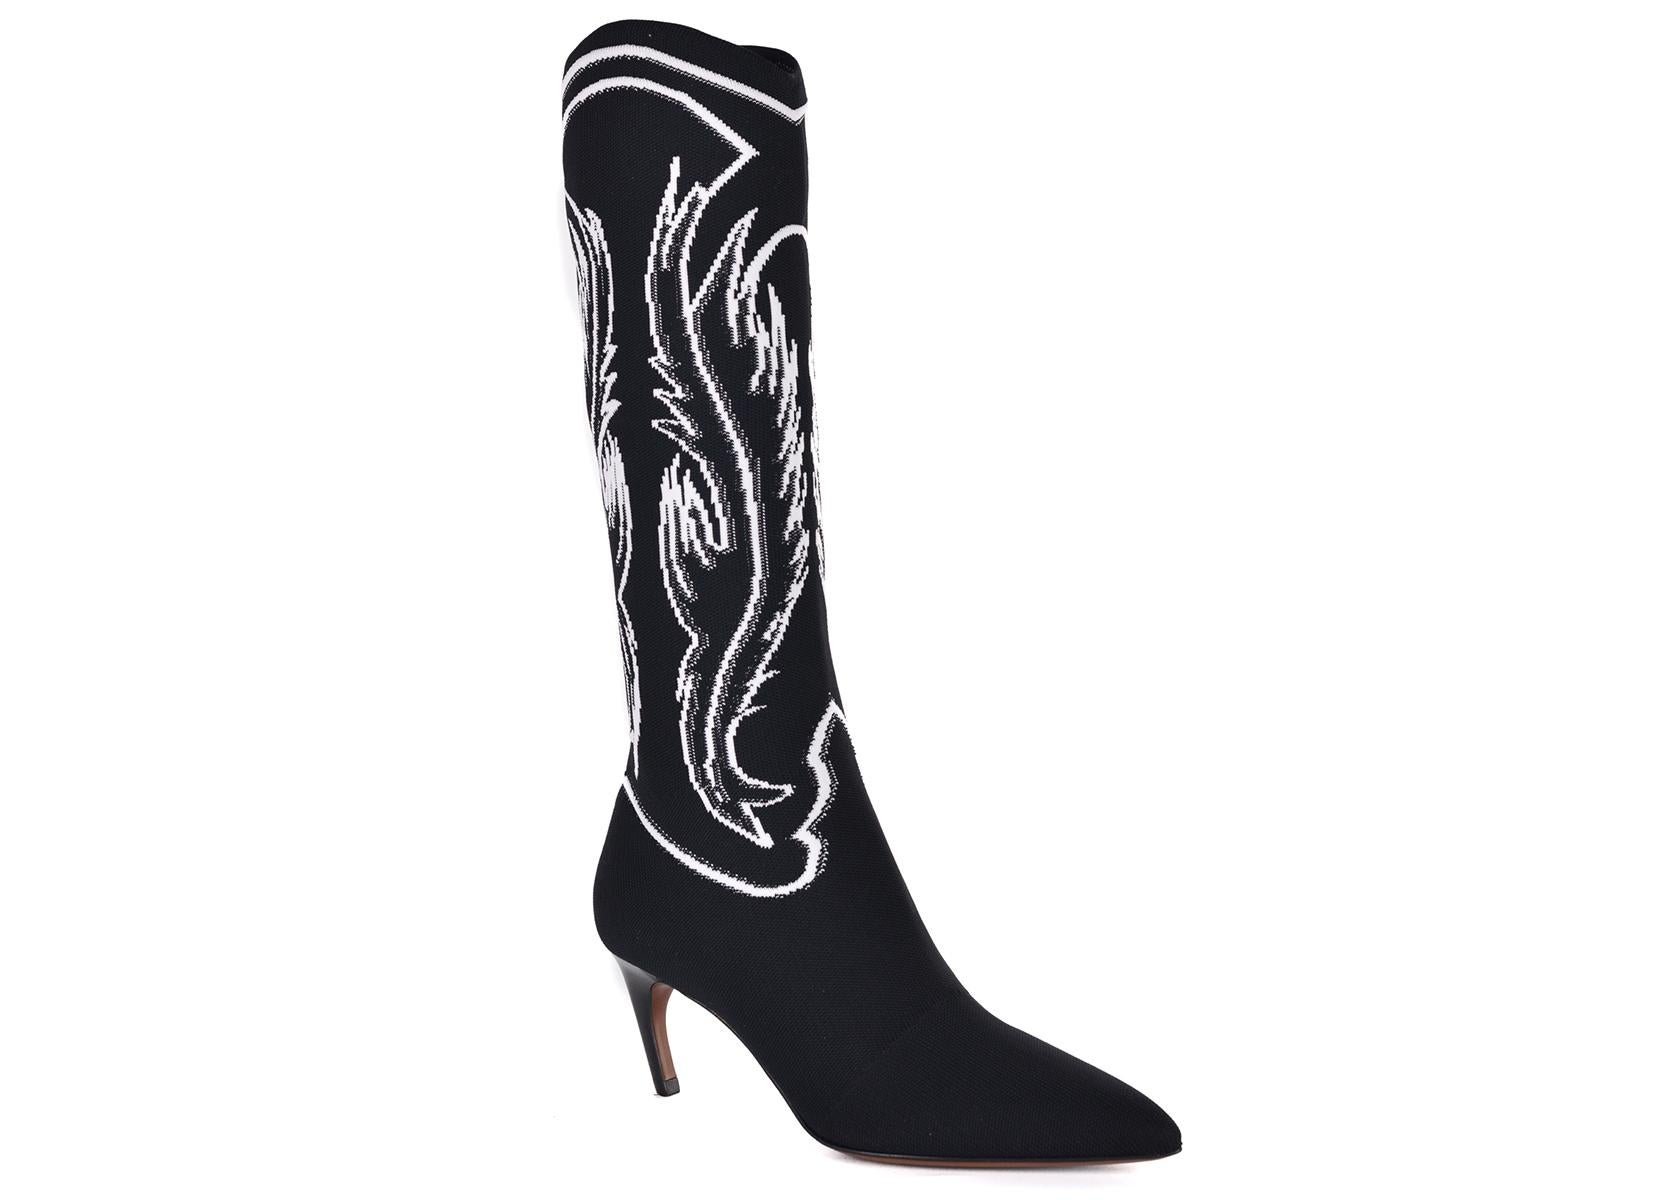 Christian Dior's Black Jacqurd Knit Mid Calf Sock boots. From the Cruise 2018 collection, these boots are the perfect pair of shoes for an upscale street style look. Pair with black denim and a chic white blouse for a sophisticated chic street